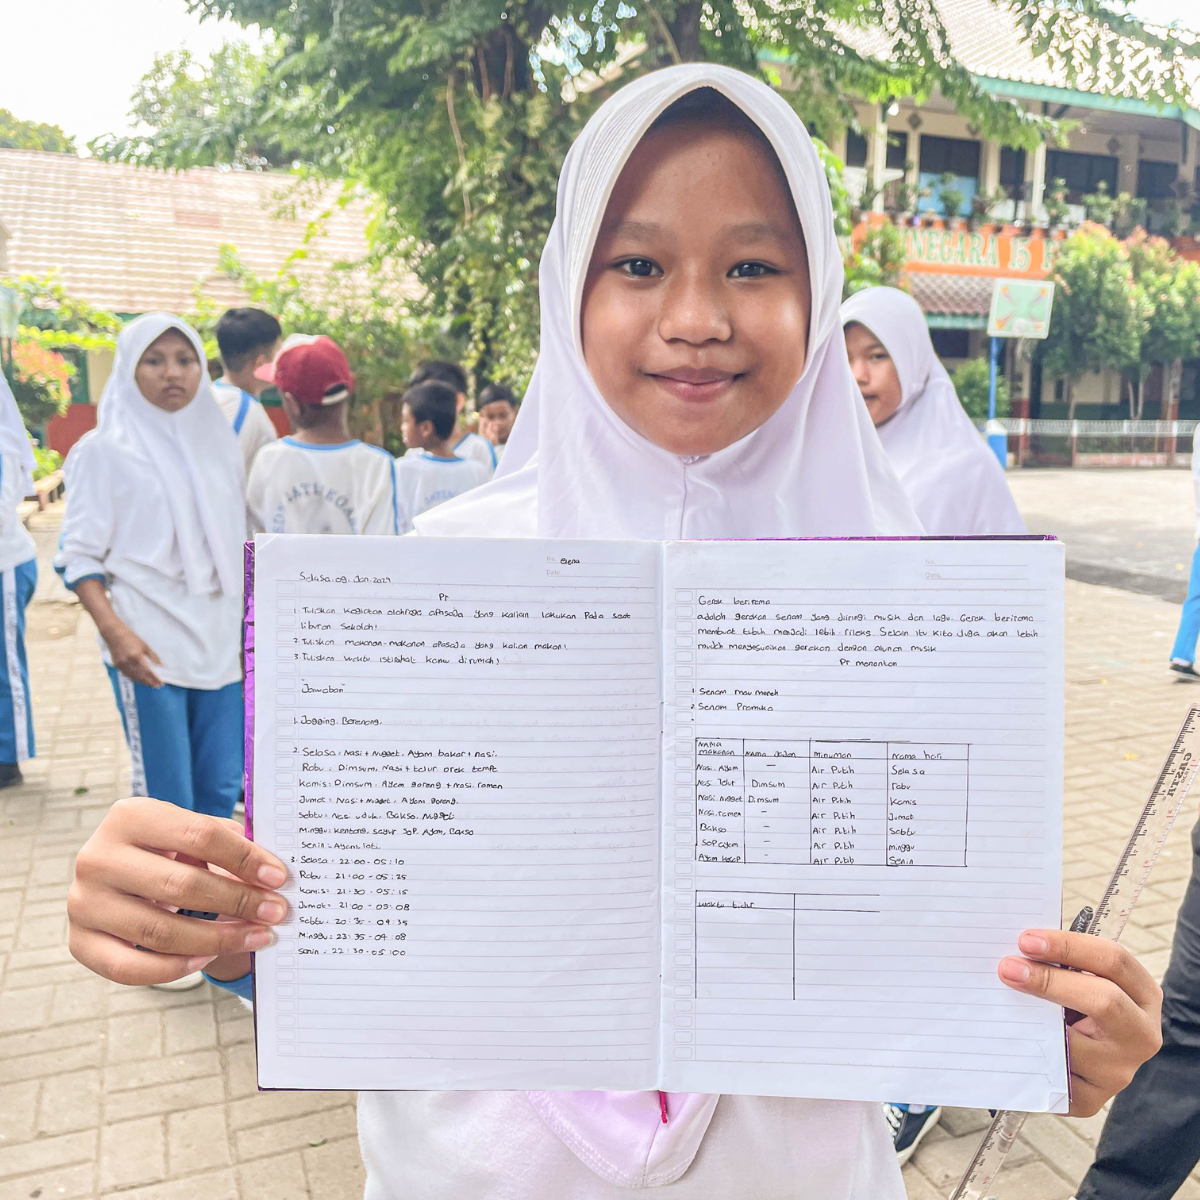 Instead of Venting, Jakarta's Kids are Keeping a Healthy Journal